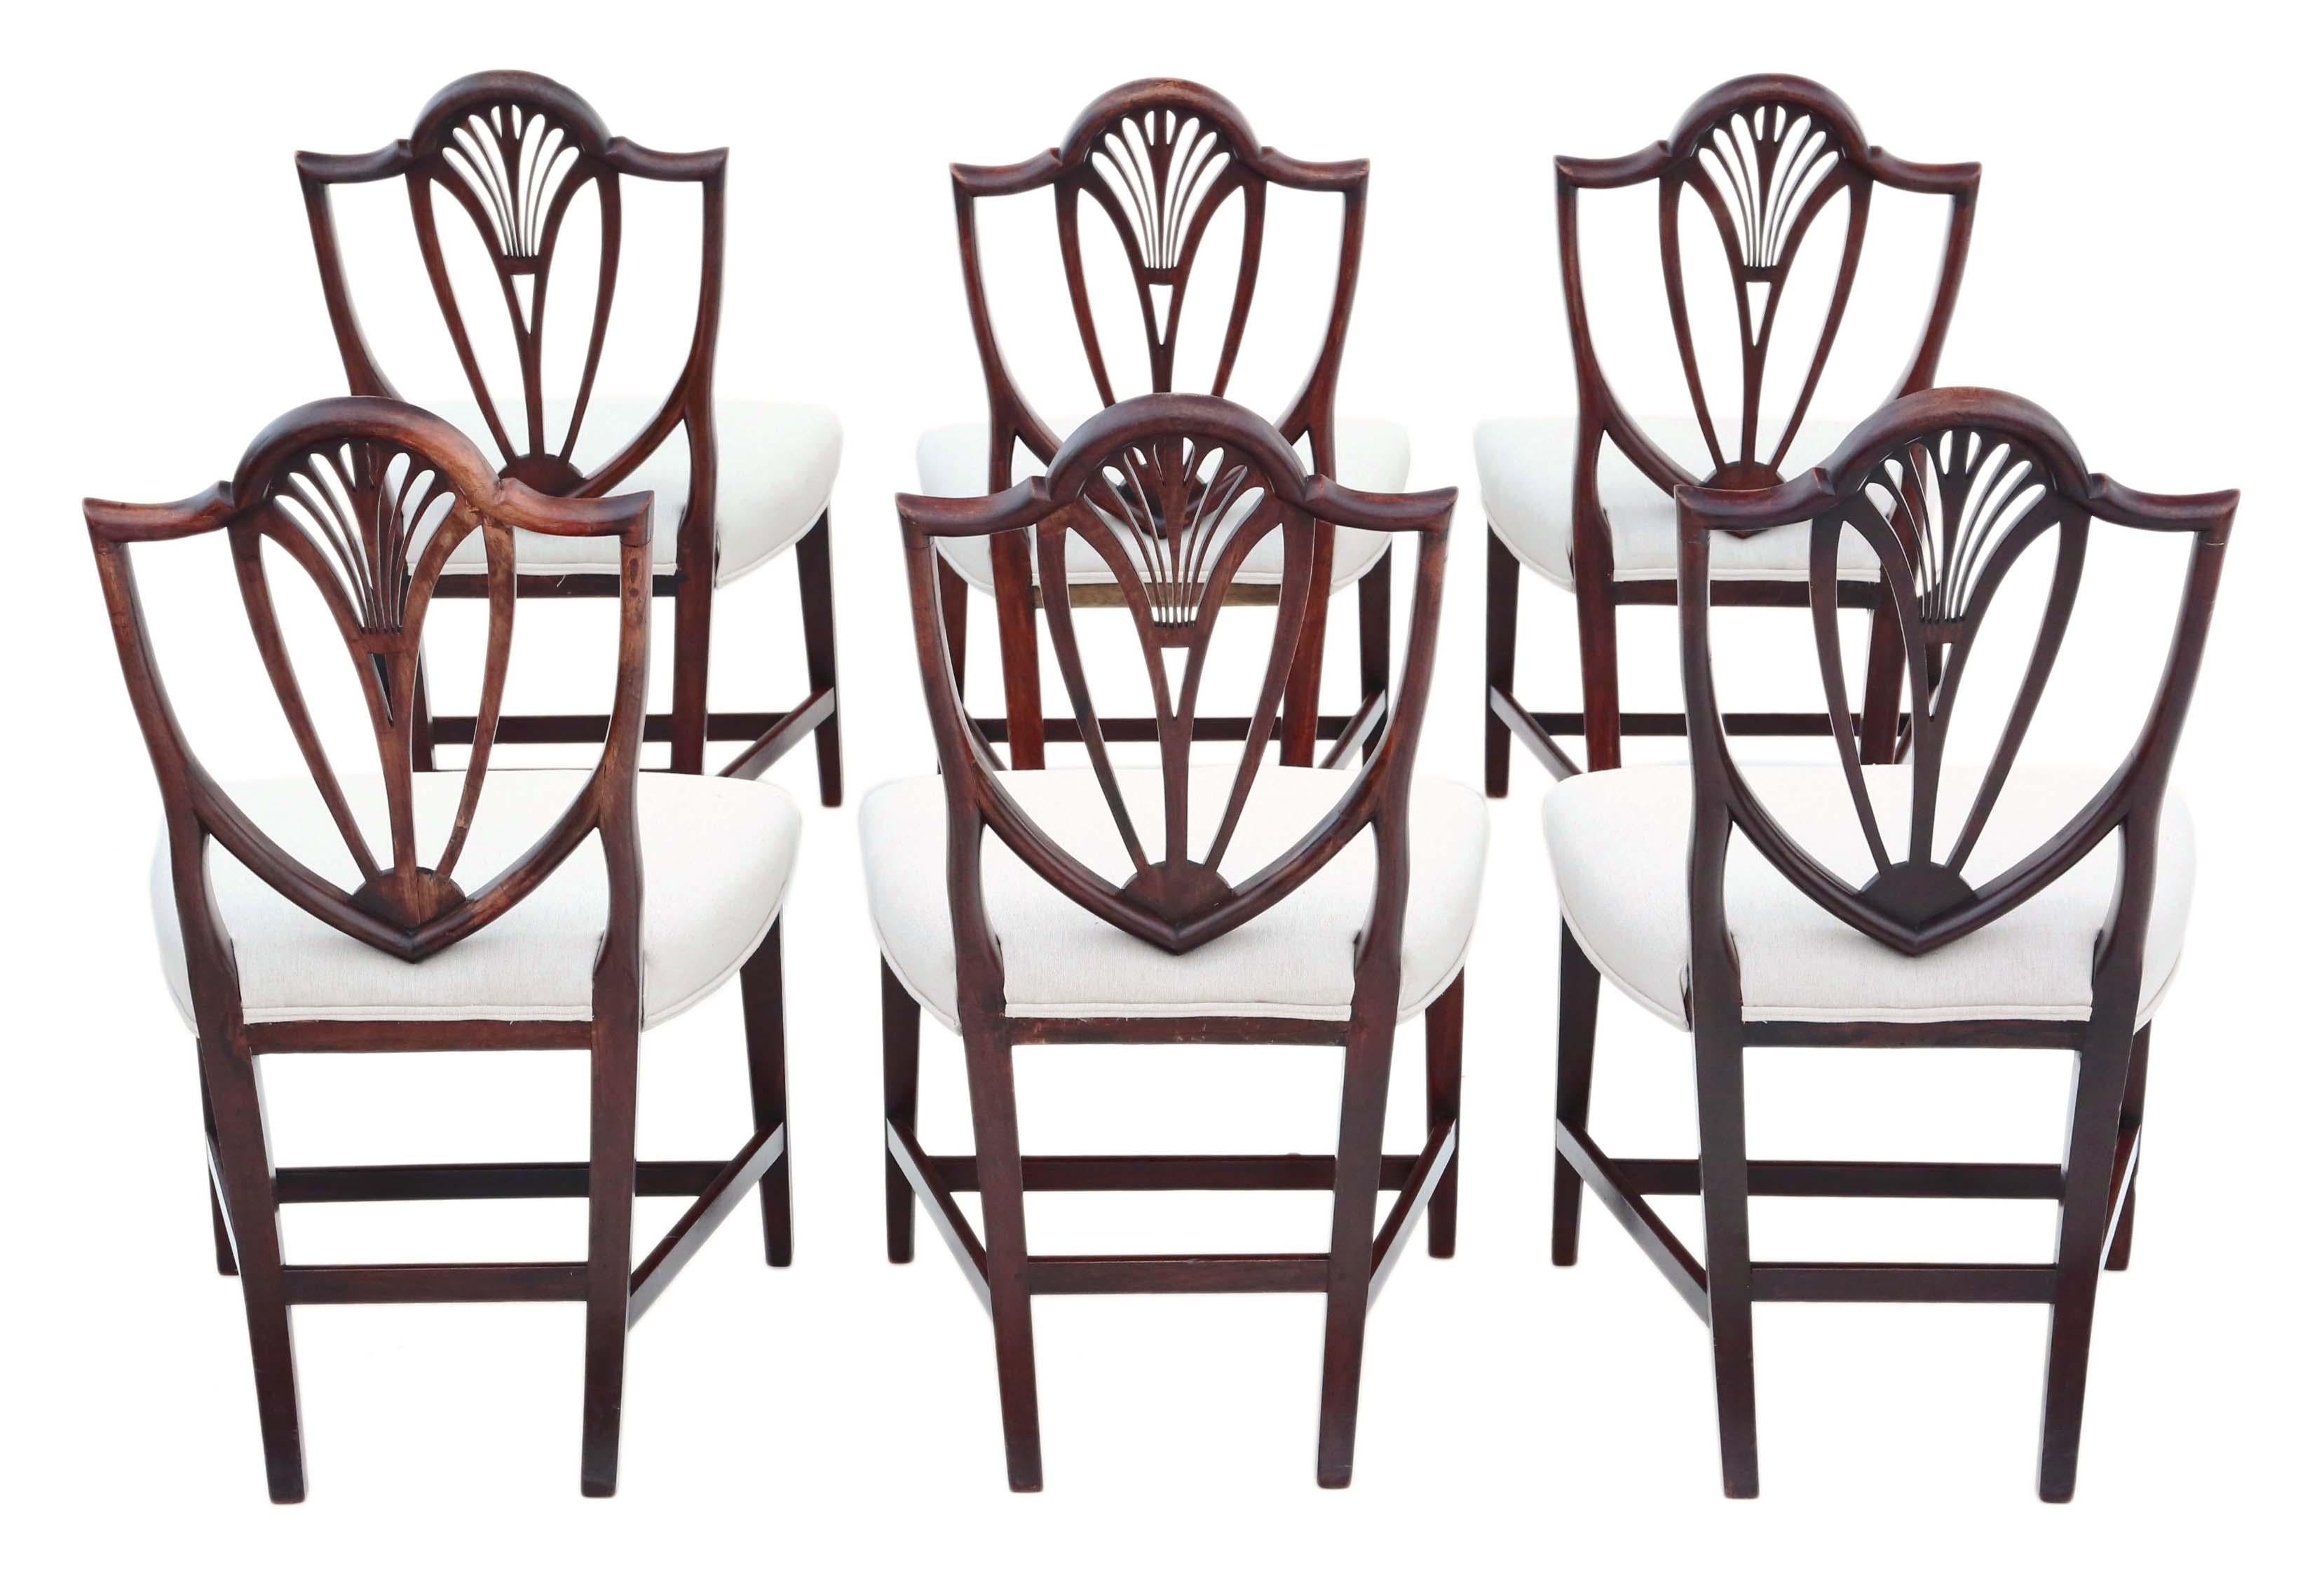 Antique fine quality set of 6 Georgian mahogany shield back dining chairs C1820. Very rare, with an elegant shield back design!

No loose joints.

New professional upholstery. Wide generous seats.

Overall maximum dimensions: 57cm W x 50cm D x